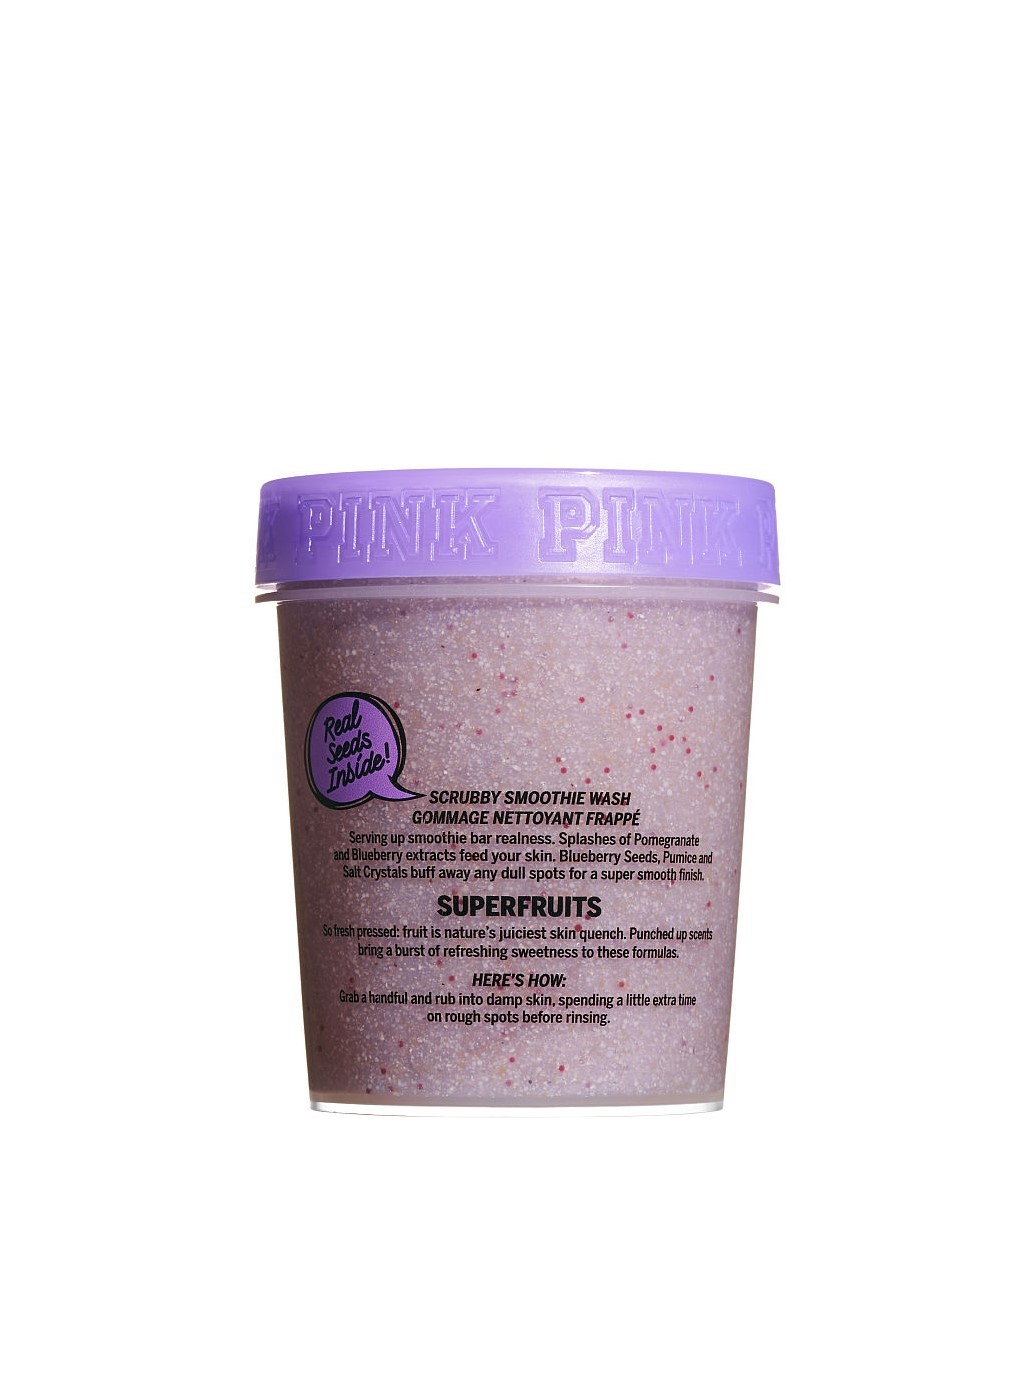 Скраб для тела Victoria's Secret PINK Berry Scrub Scrubby Smoothie Wash with Pomegranate Extract, 283 г, 283 г